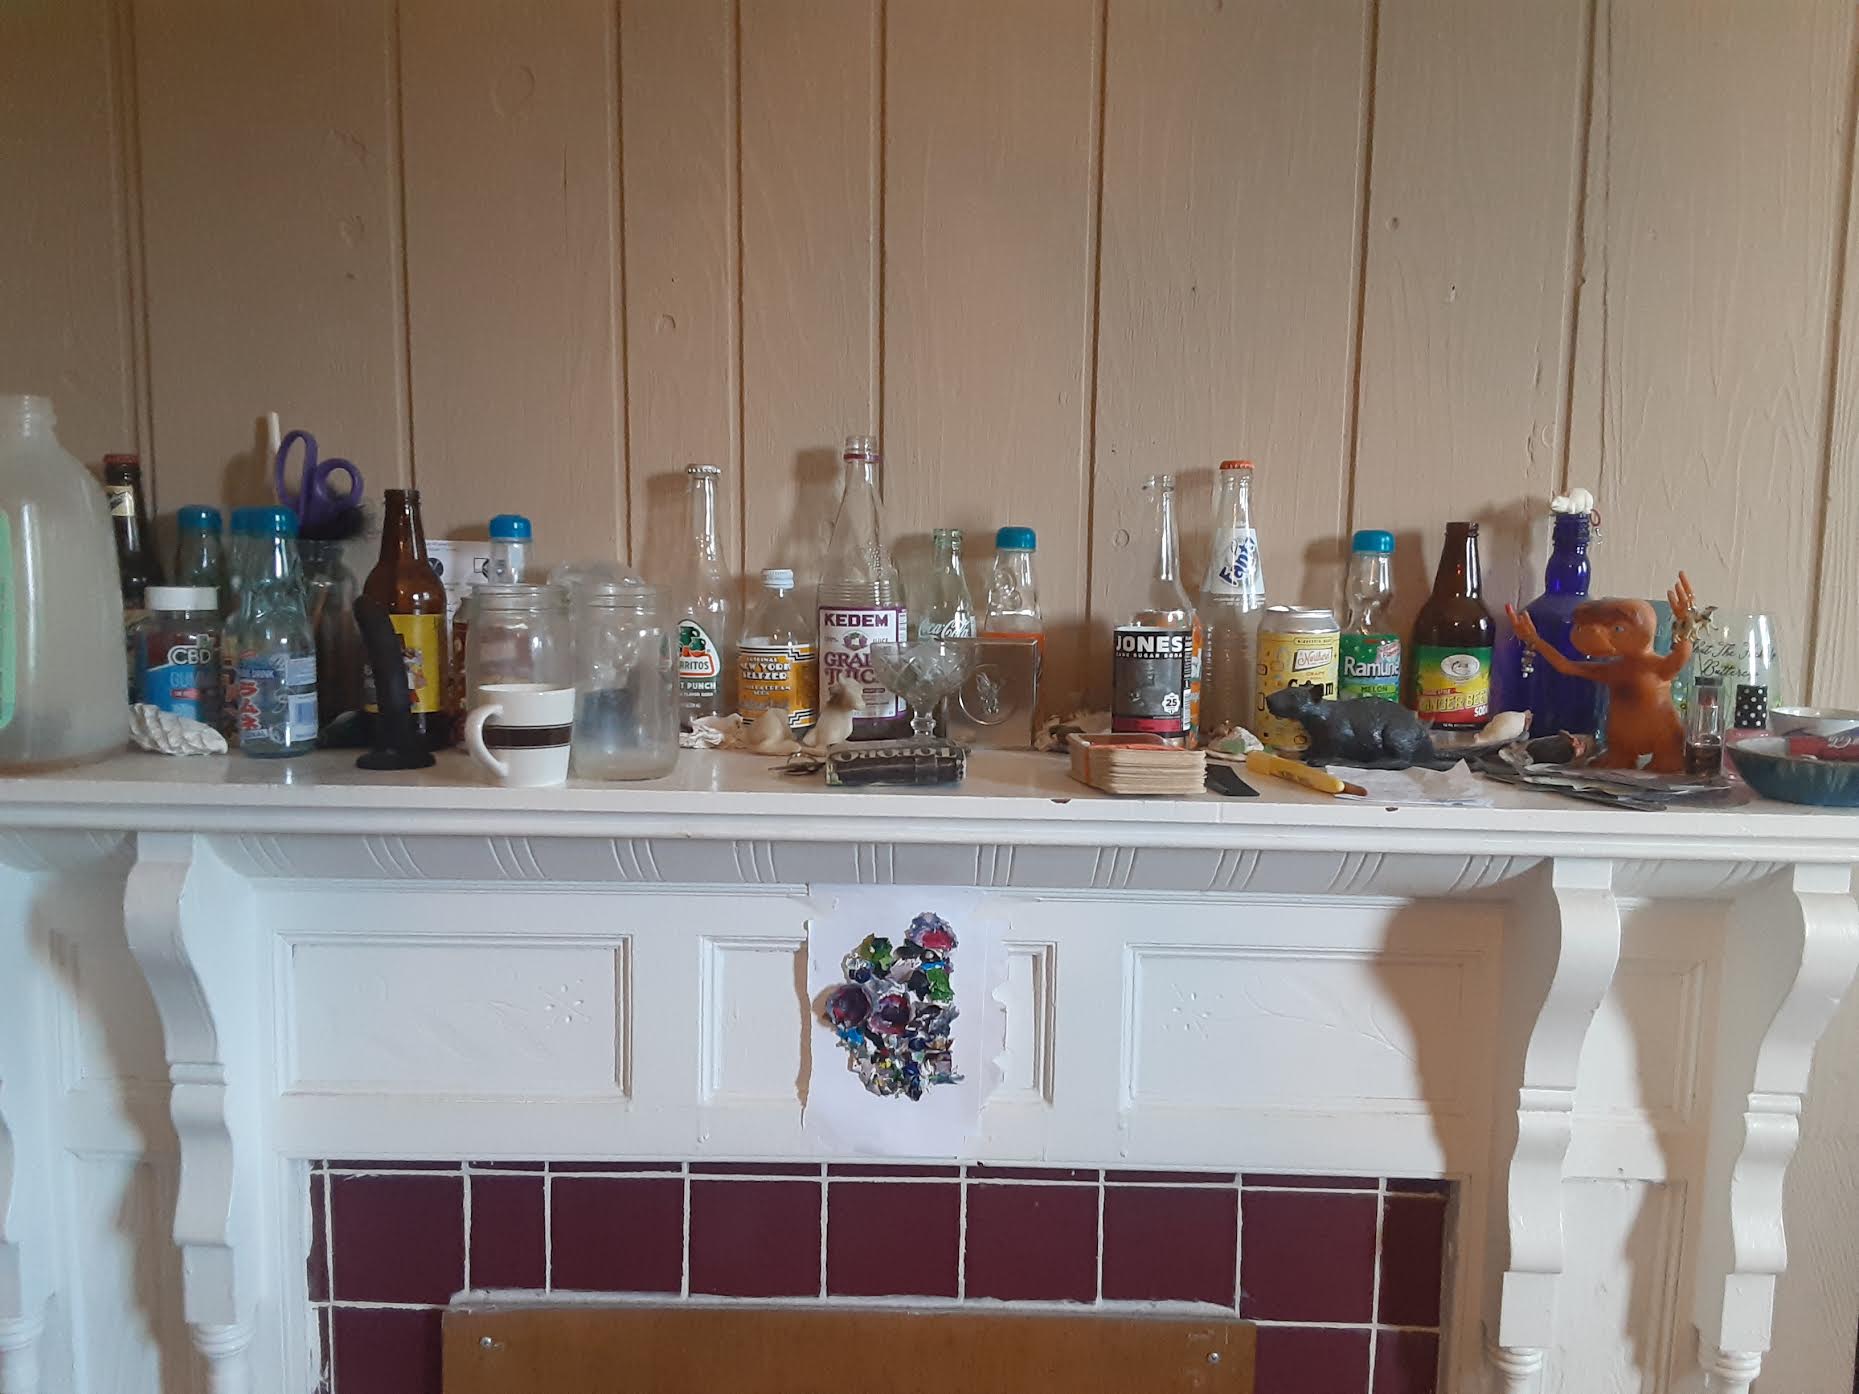 defunct fireplace mantle with arrayed objects on it, including many bottles, a dildo, shells, and hard-to-make-out detritus, can click this image to enter a page that says "come in!